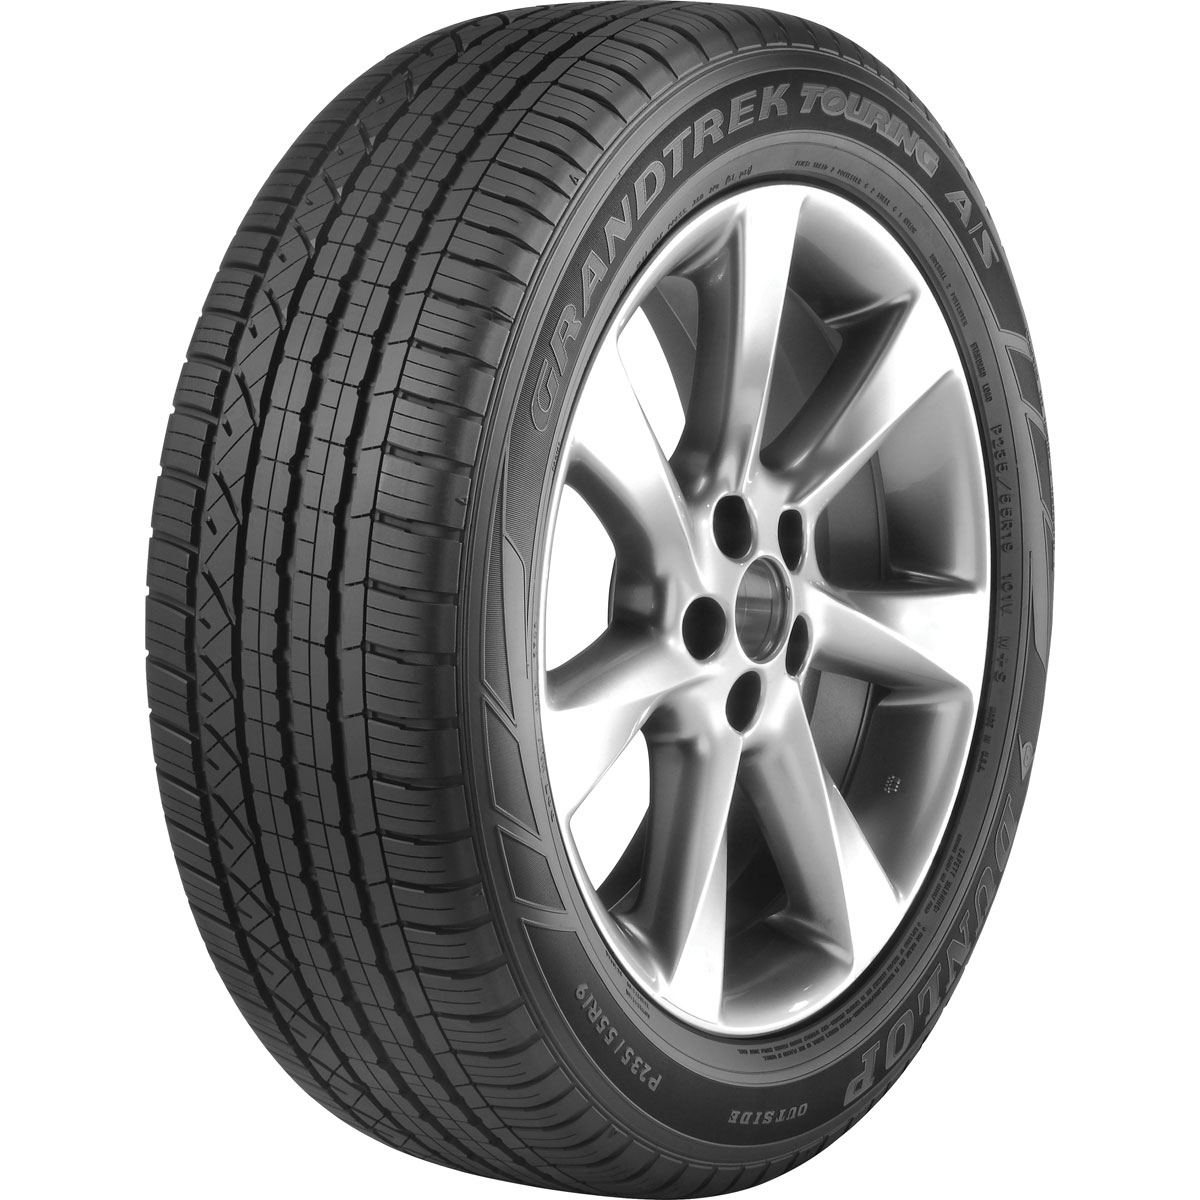 Gomme Nuove Dunlop 225/70 R16 103H GRANDTREK TOURING AS M+S pneumatici nuovi All Season